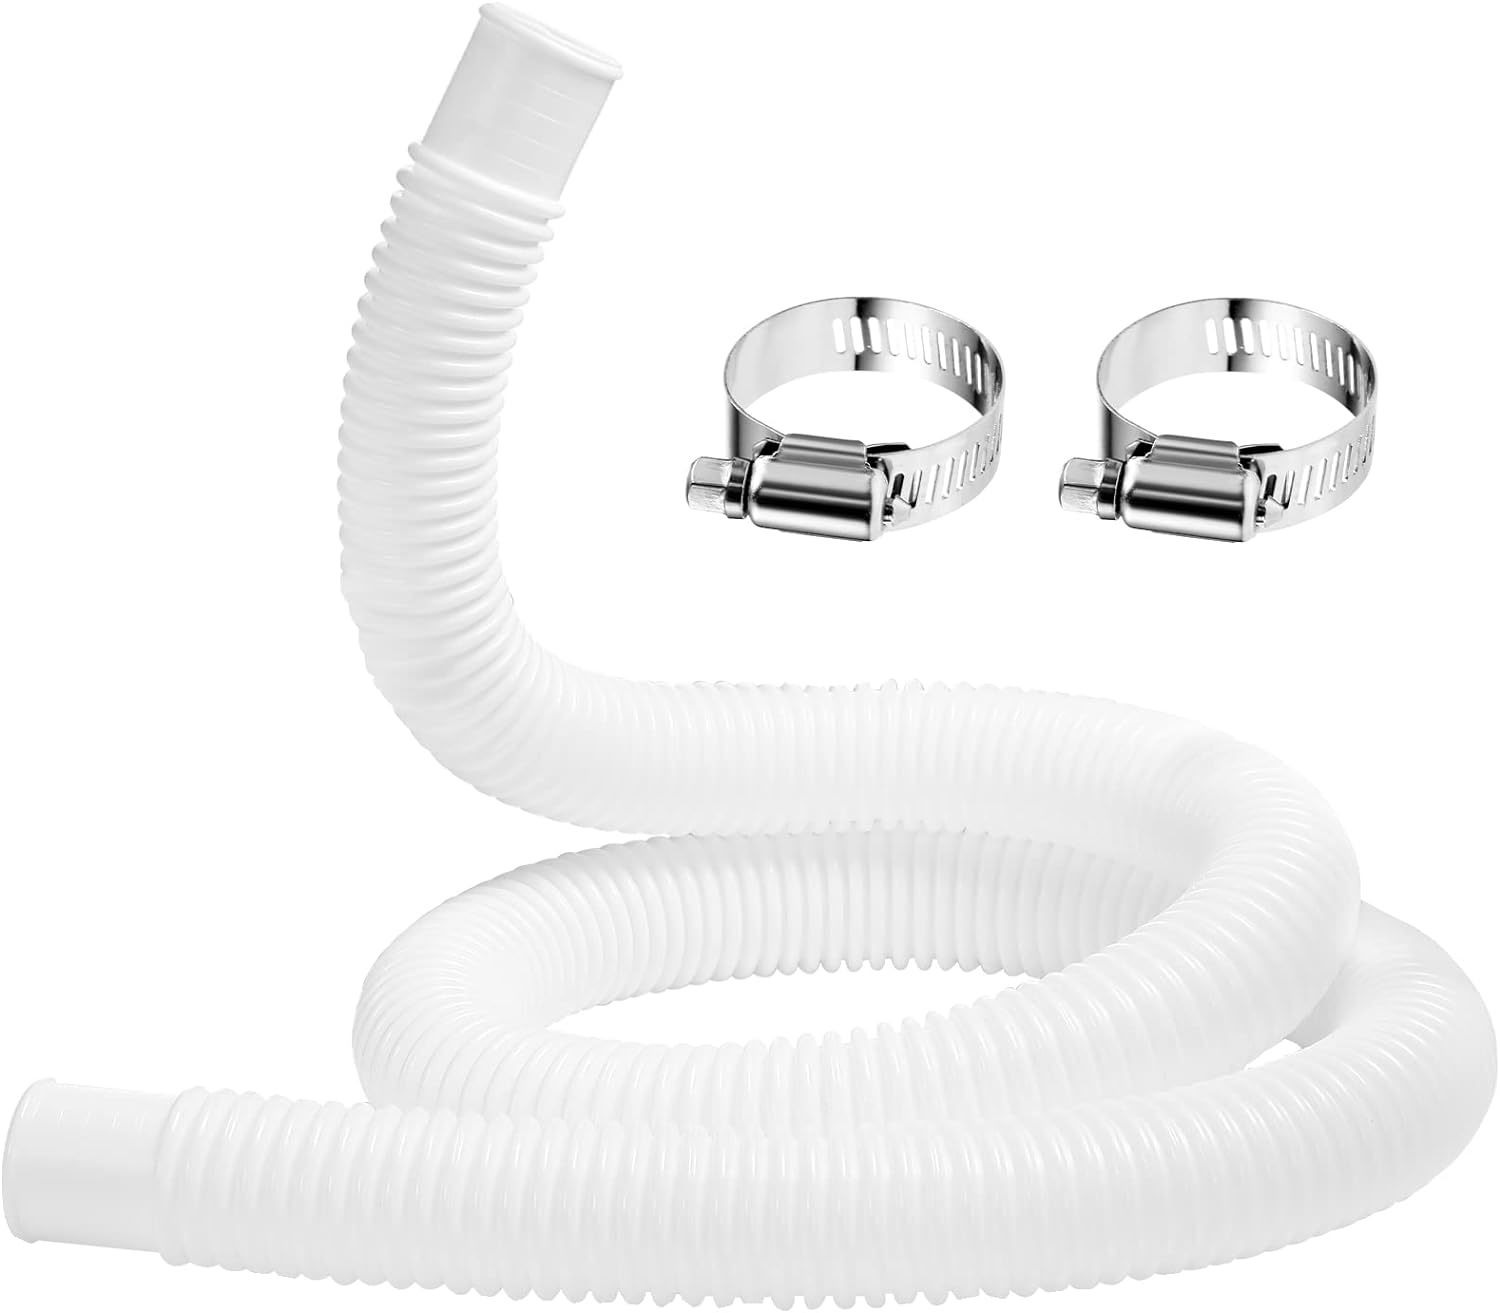 Primary image for 1.25"x 59" Pool Hose for Above Ground Intex Systems and Filter Pumps 330 GPH 530